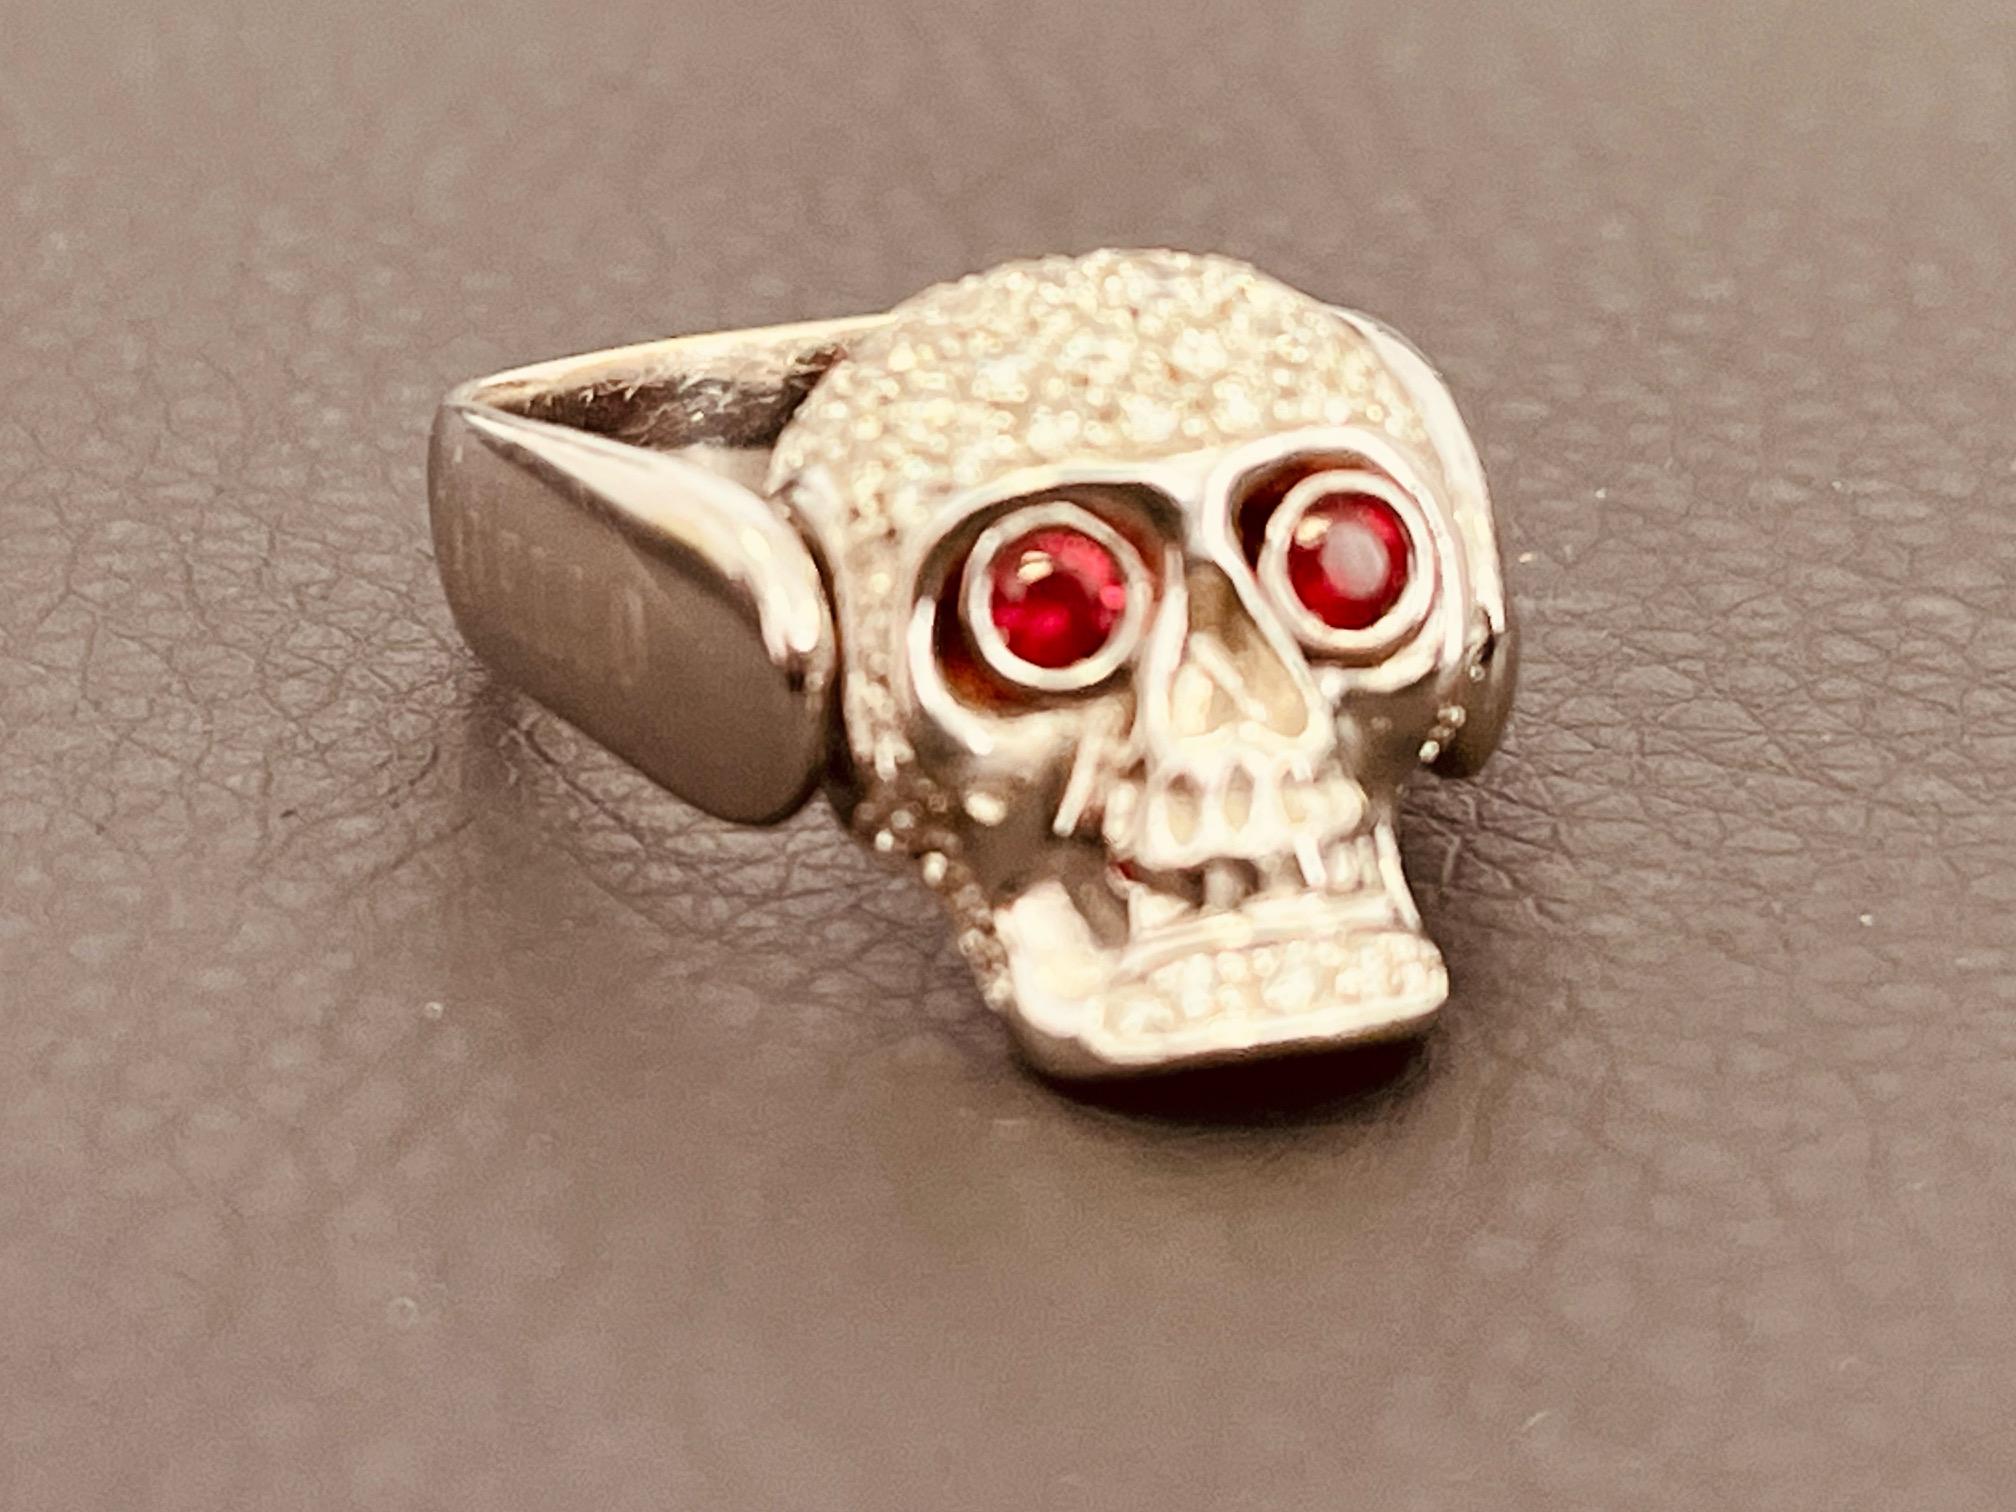 Gavello 18 Carat White Gold and 0.7 Carat Diamond Skull Ring with Ruby Eyes For Sale 1